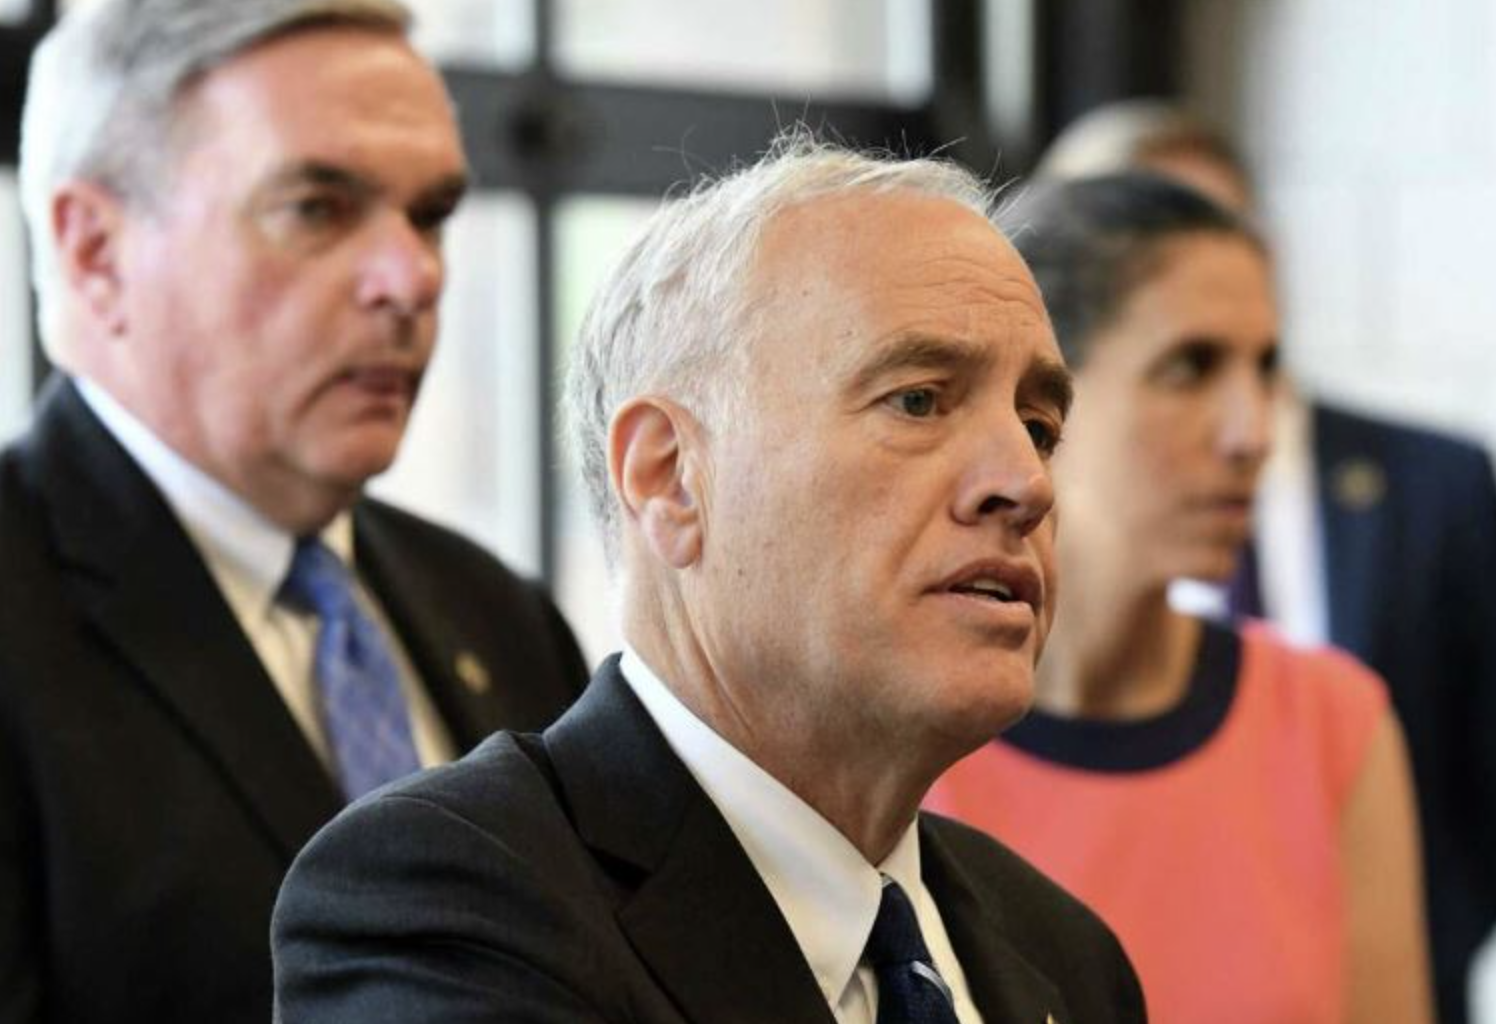 Outmigration hurting state tax revenue, DiNapoli says 1